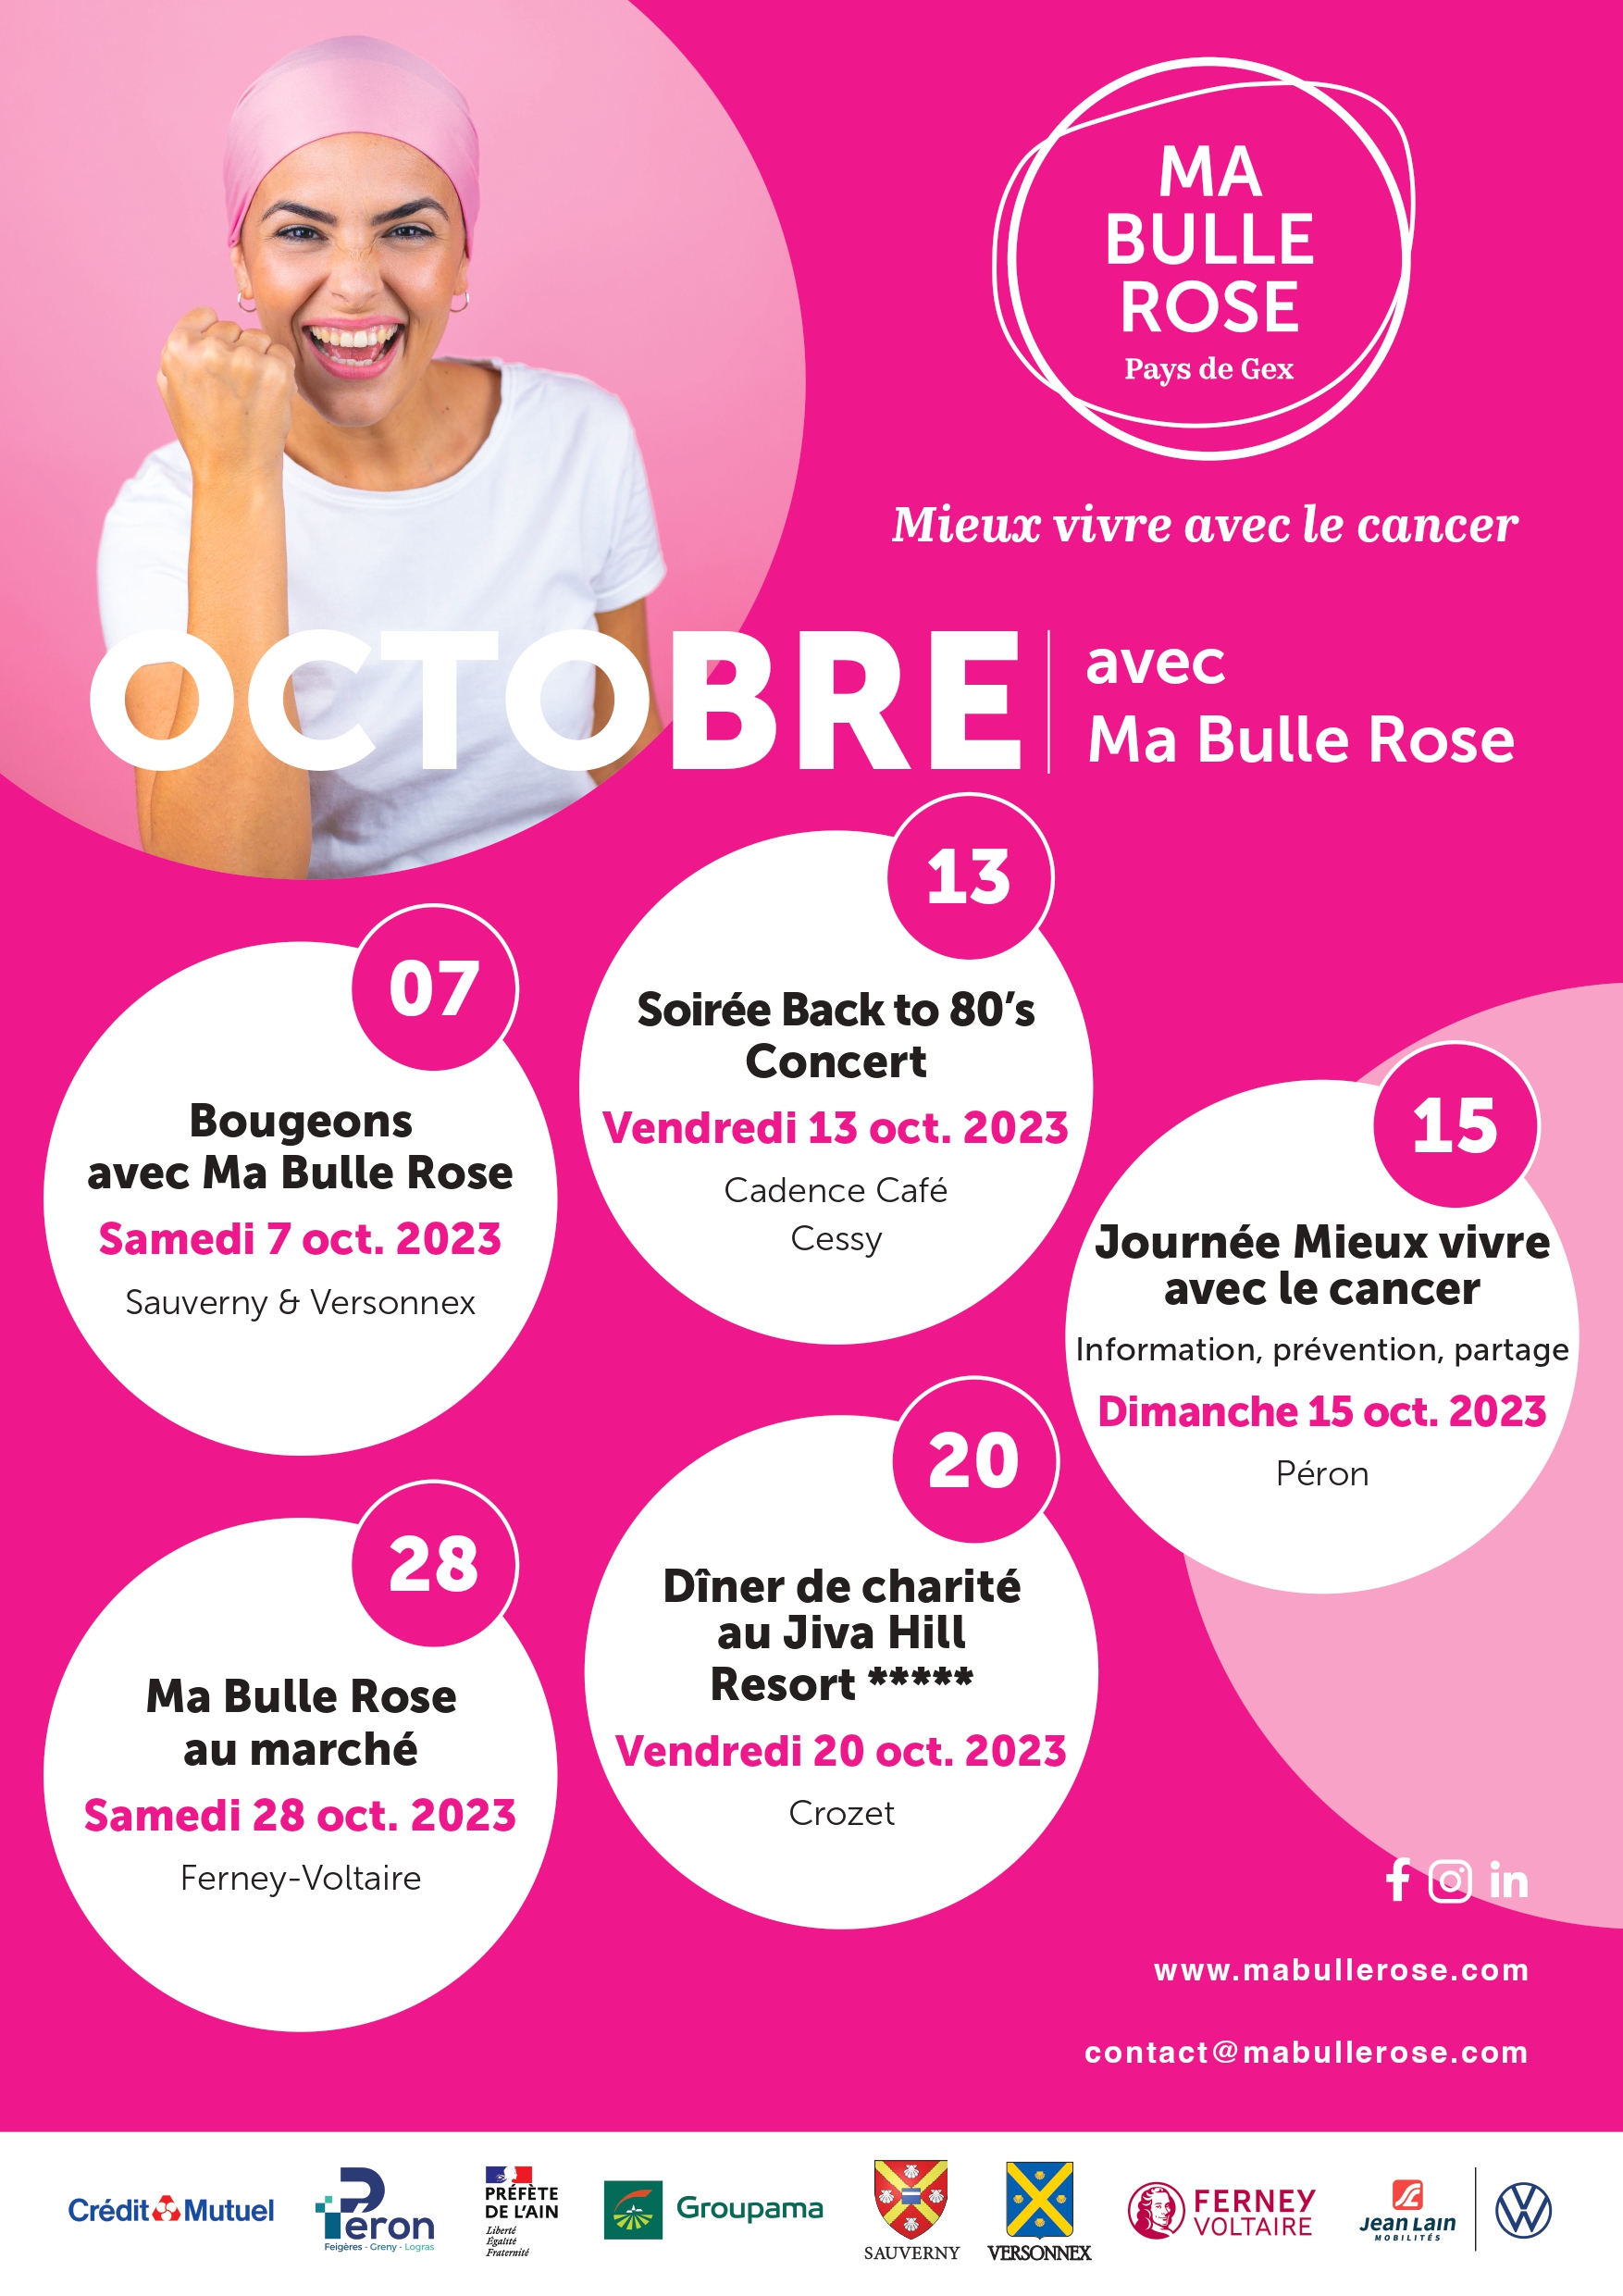 You are currently viewing Octobre Rose avec ma Bulle Rose, à vos agendas